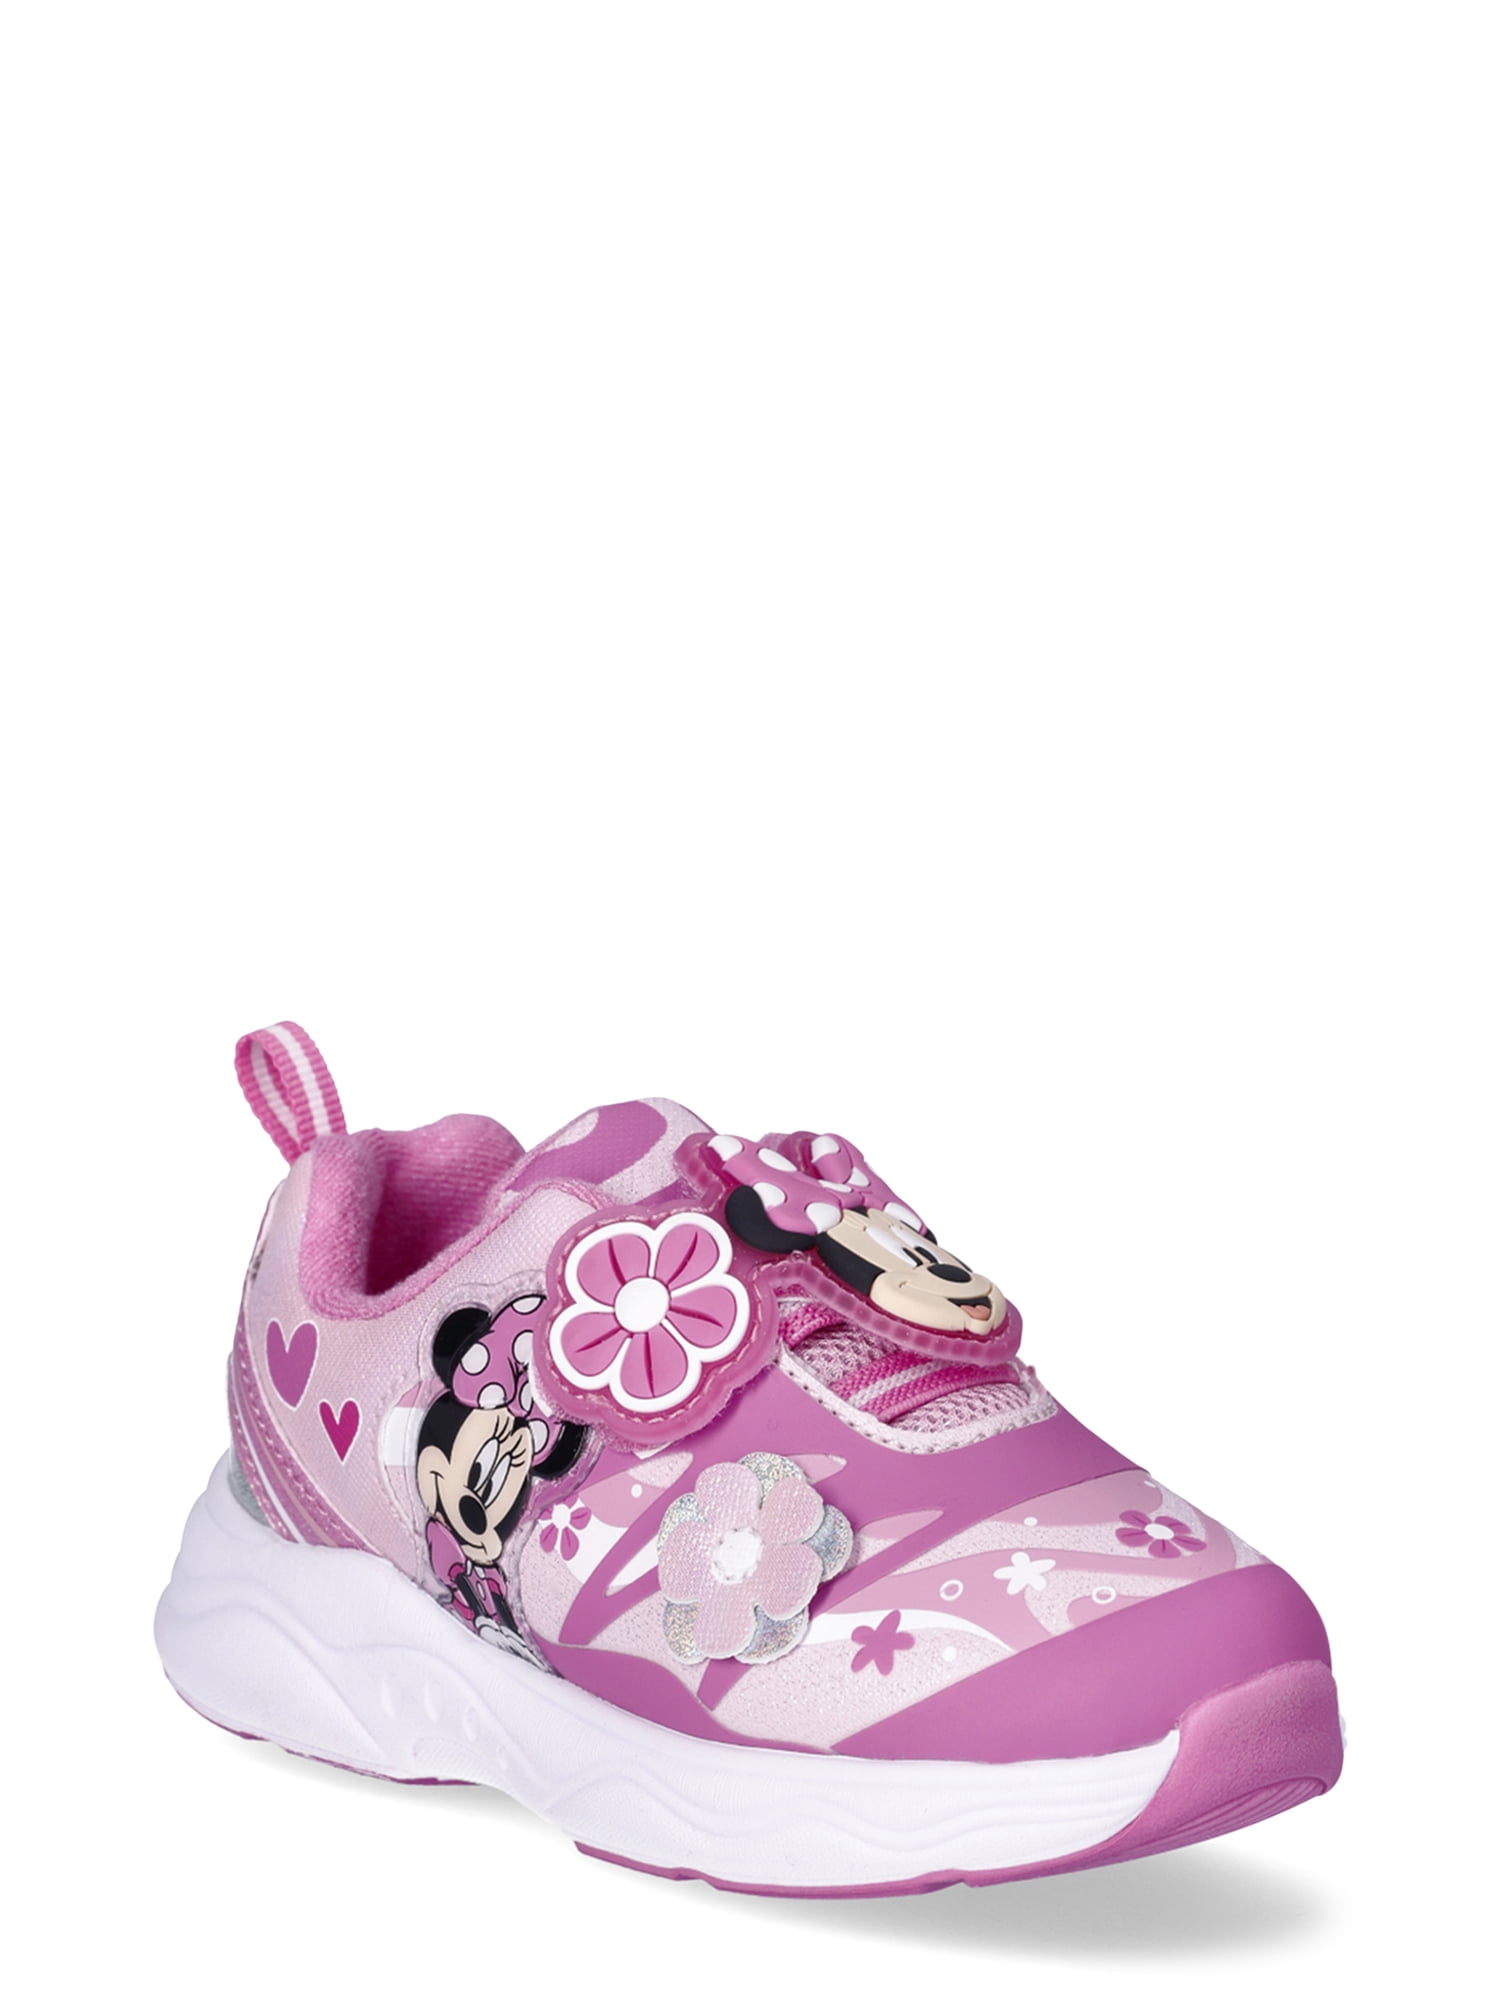 Disney Minnie Mouse Toddler Girl Graphic Slip On Sneakers, Sizes 6-11 ...